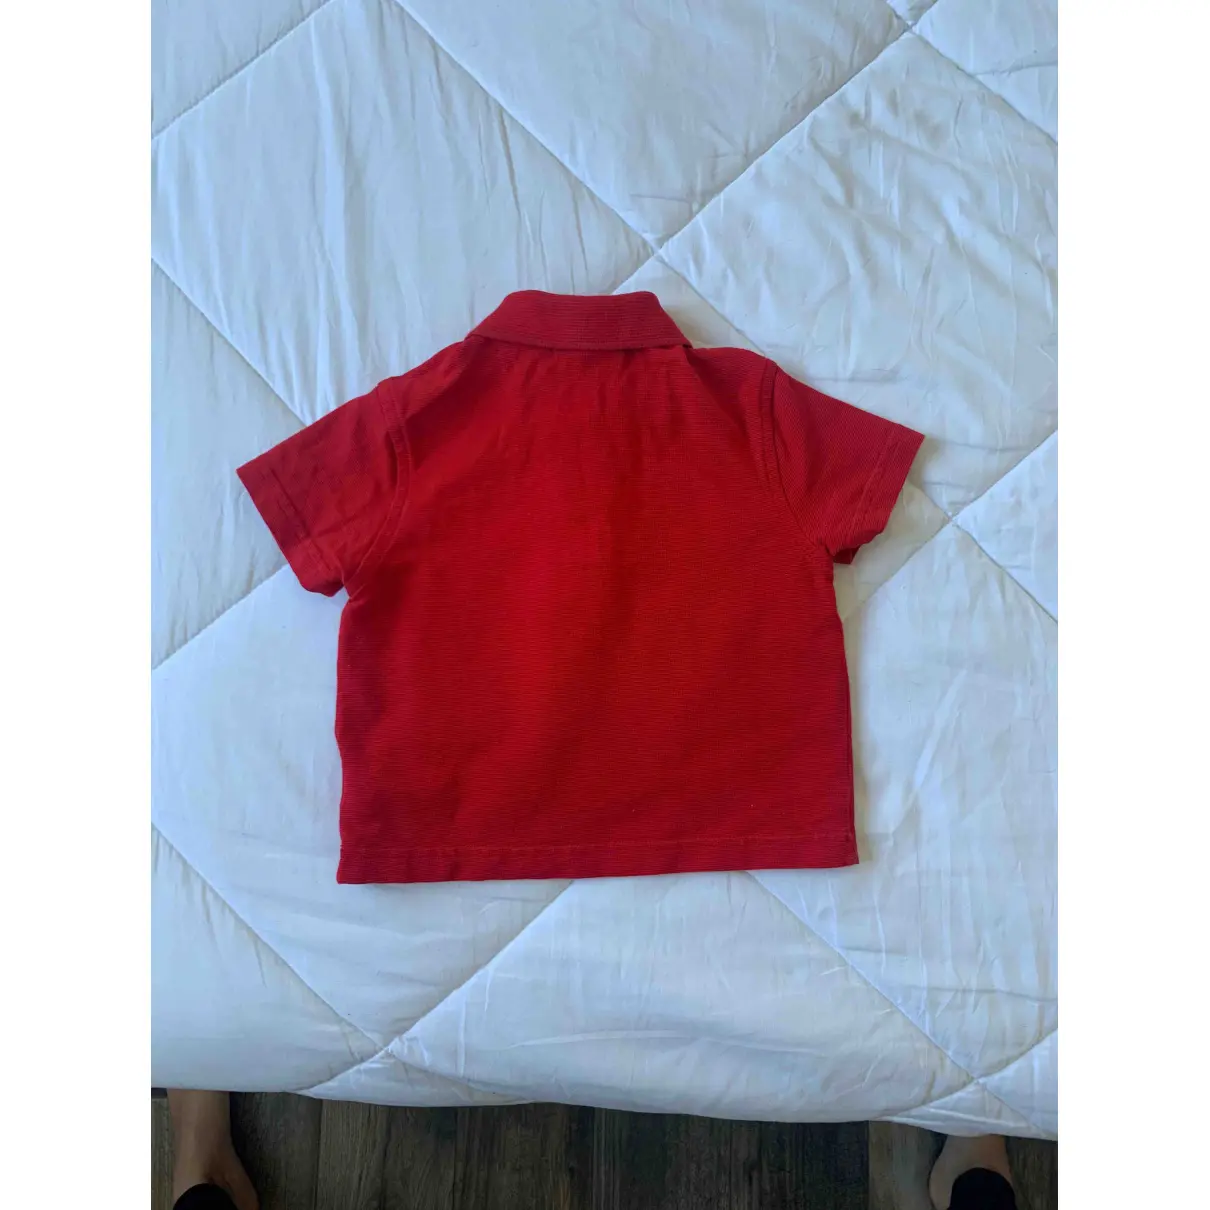 Buy Lacoste Red Cotton Top online